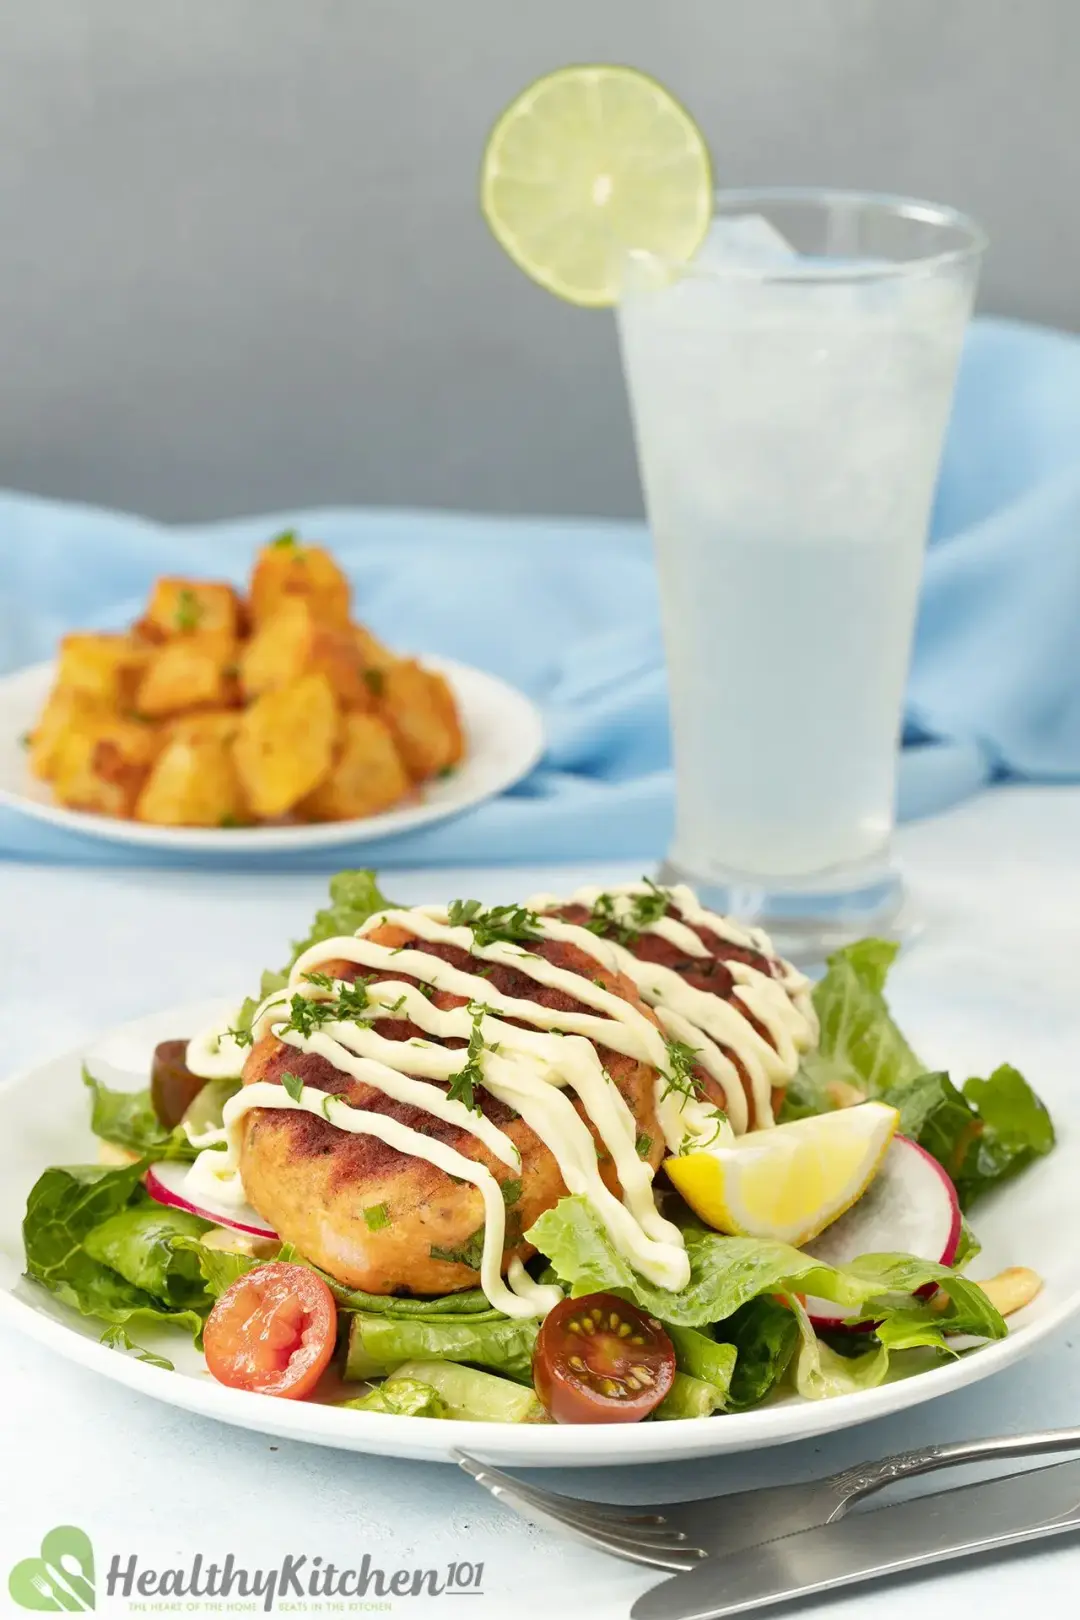 A picture of some salmon croquettes drizzled with the white sauce on a plate with fresh veggies and greens in a blurred background of a glass of lime juice and a plate of fried potatoes.